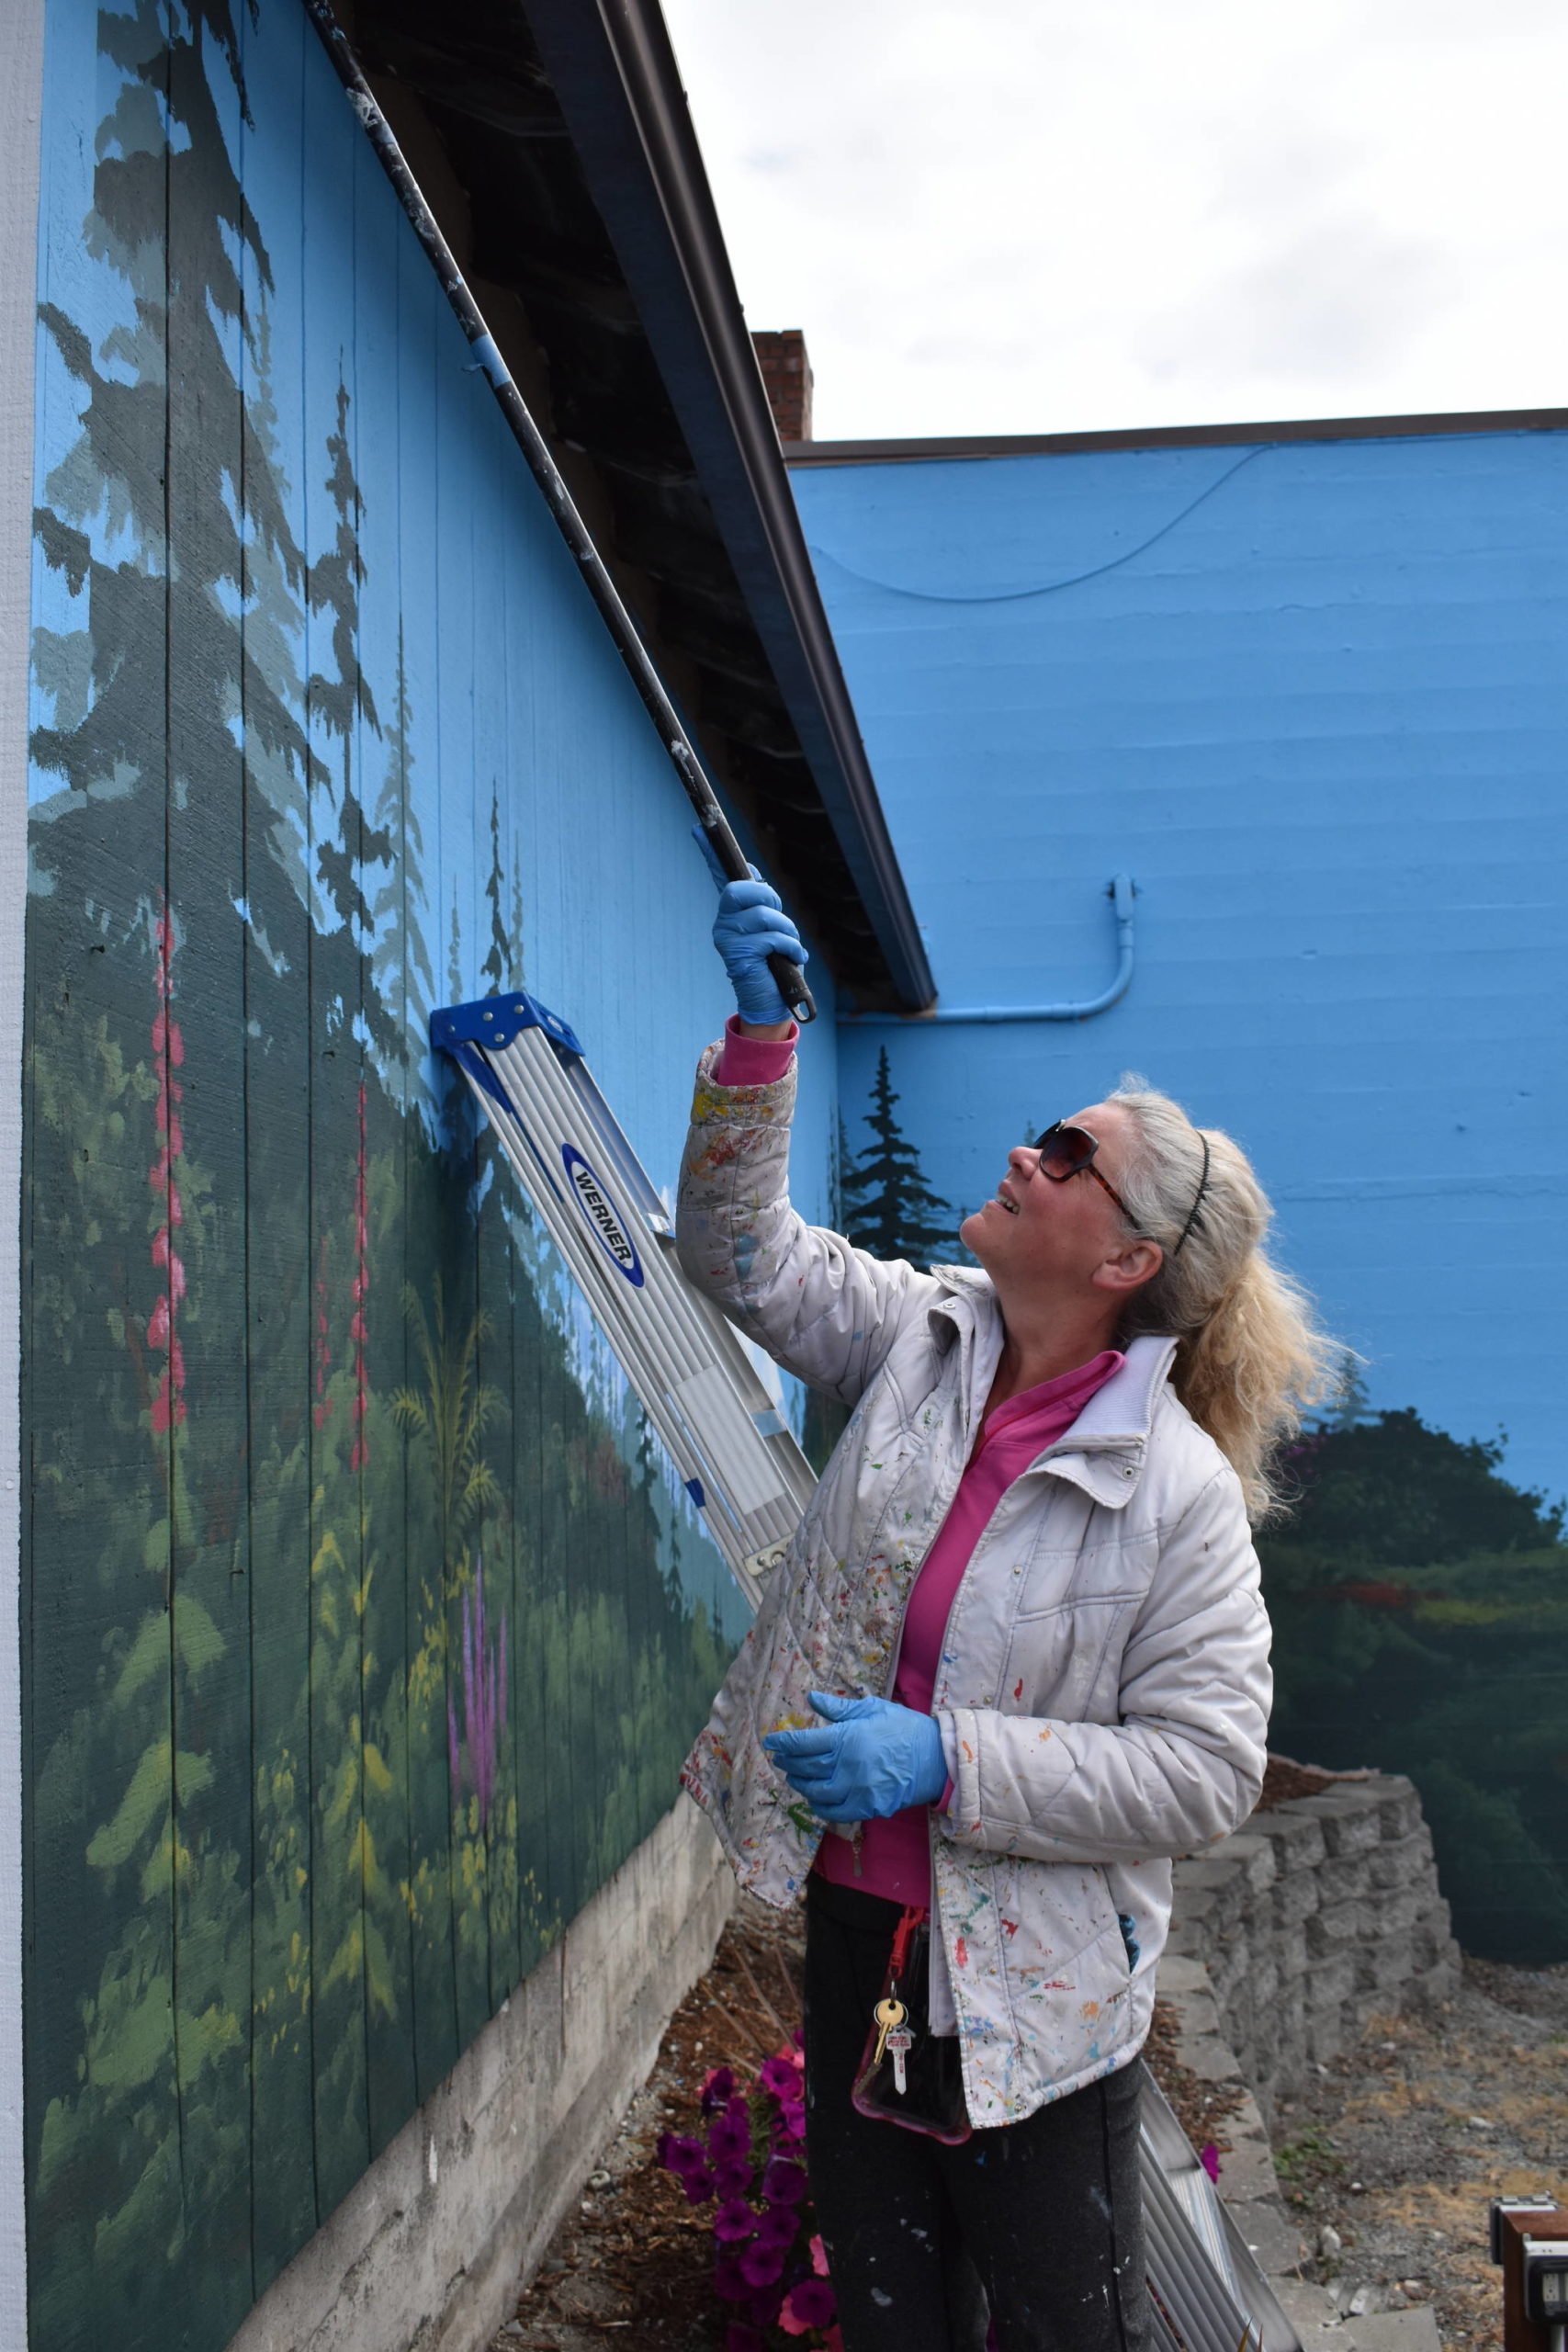 Photo by Emily Gilbert/Whidbey News-Times
Paula Fries working on a mural on the corner of Southeast Dock Street and Southeast Pioneer Way in downtown Oak Harbor. The mural spans two walls and features Mount Baker, rolling hills and a soon-to-be gate to a secret garden.